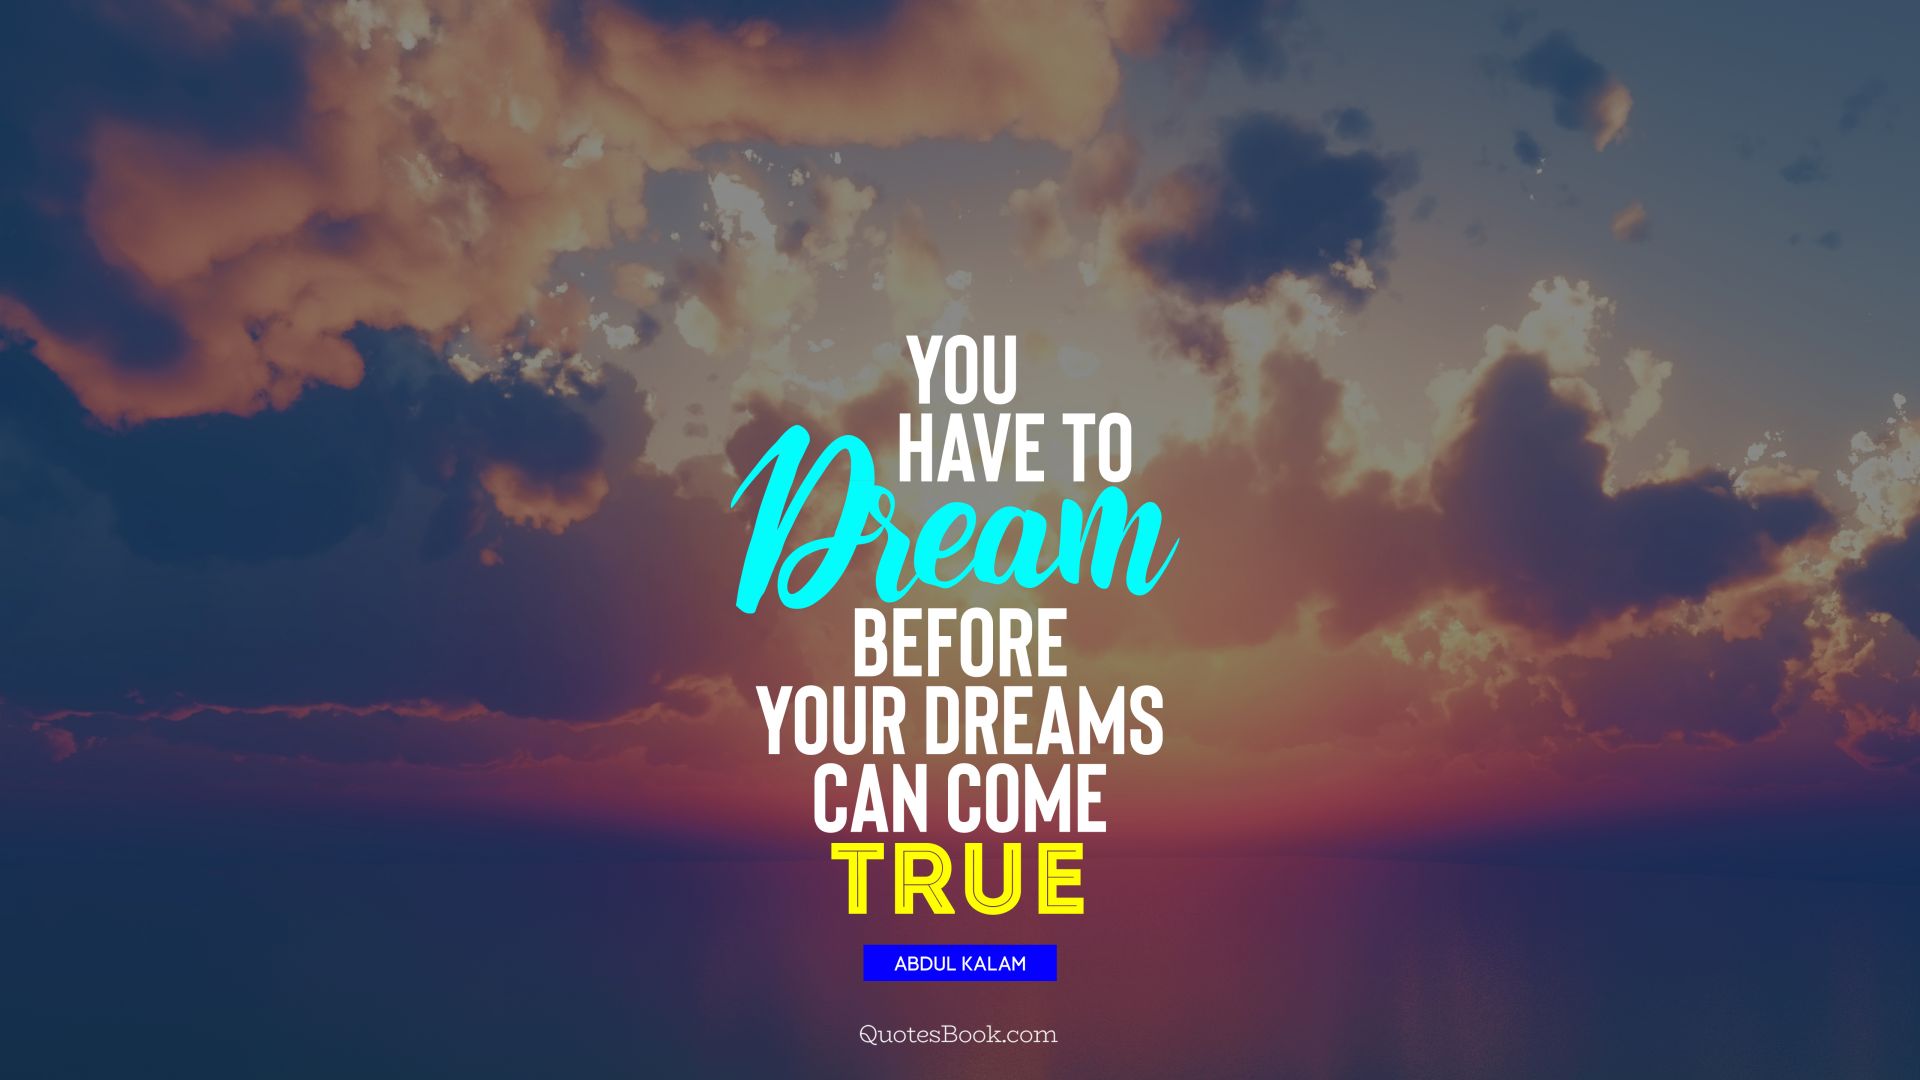 You have to dream before your dreams can come true. - Quote by Abdul Kalam